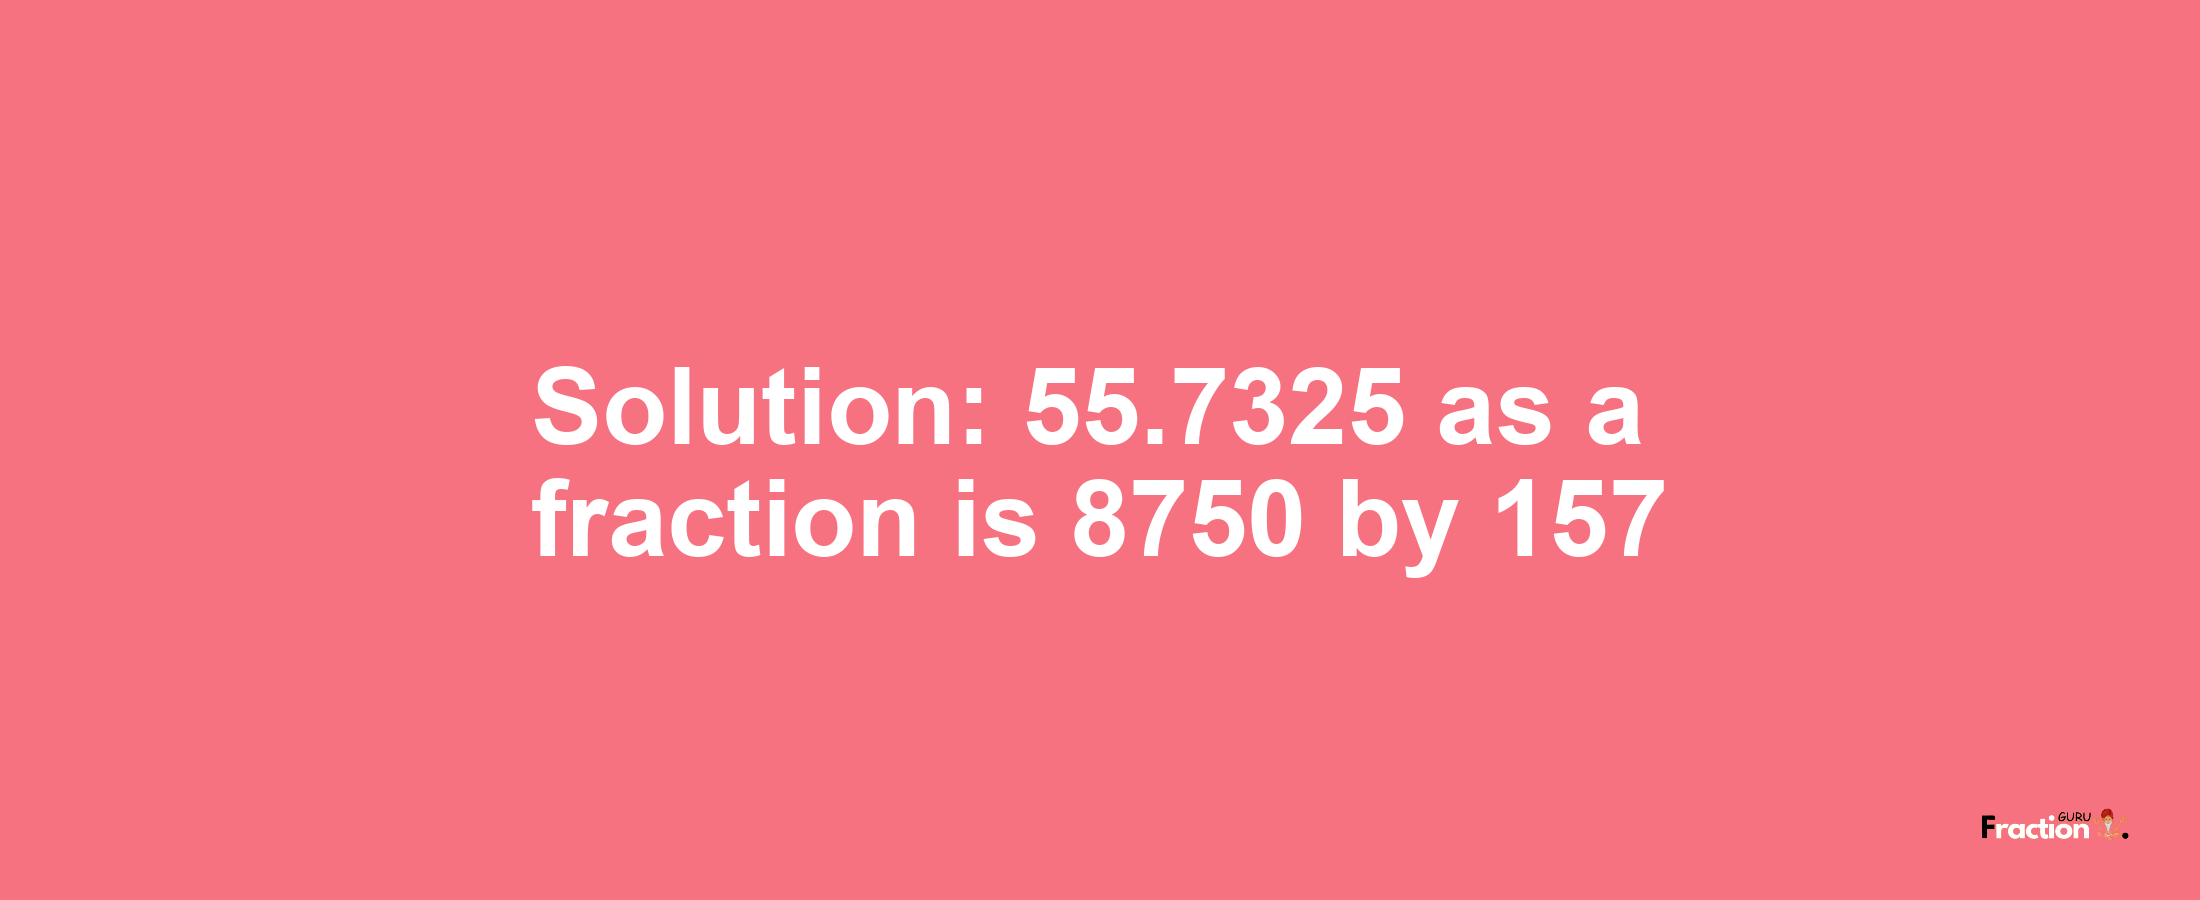 Solution:55.7325 as a fraction is 8750/157